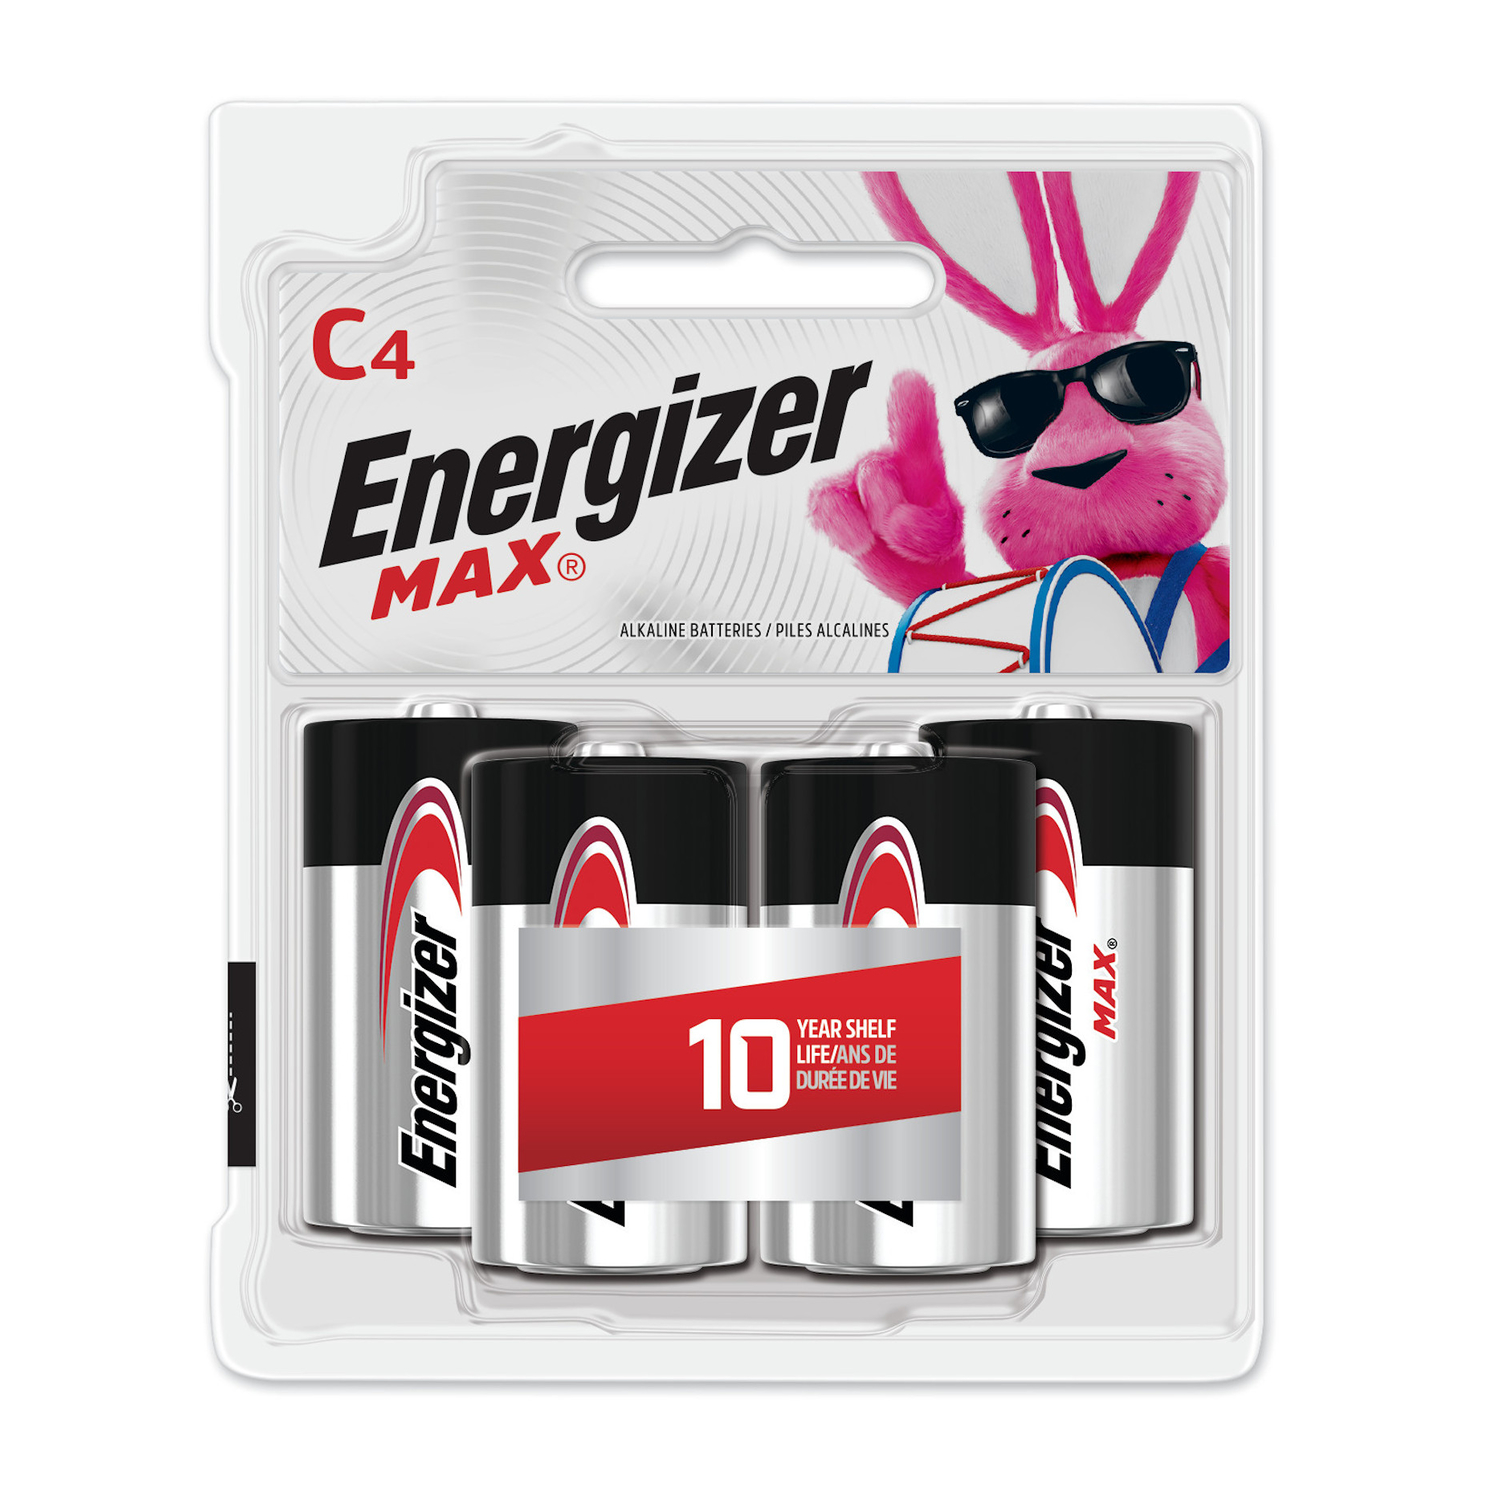 Photos - Household Switch Energizer Max C Alkaline Batteries 4 pk Carded E93BP-4 